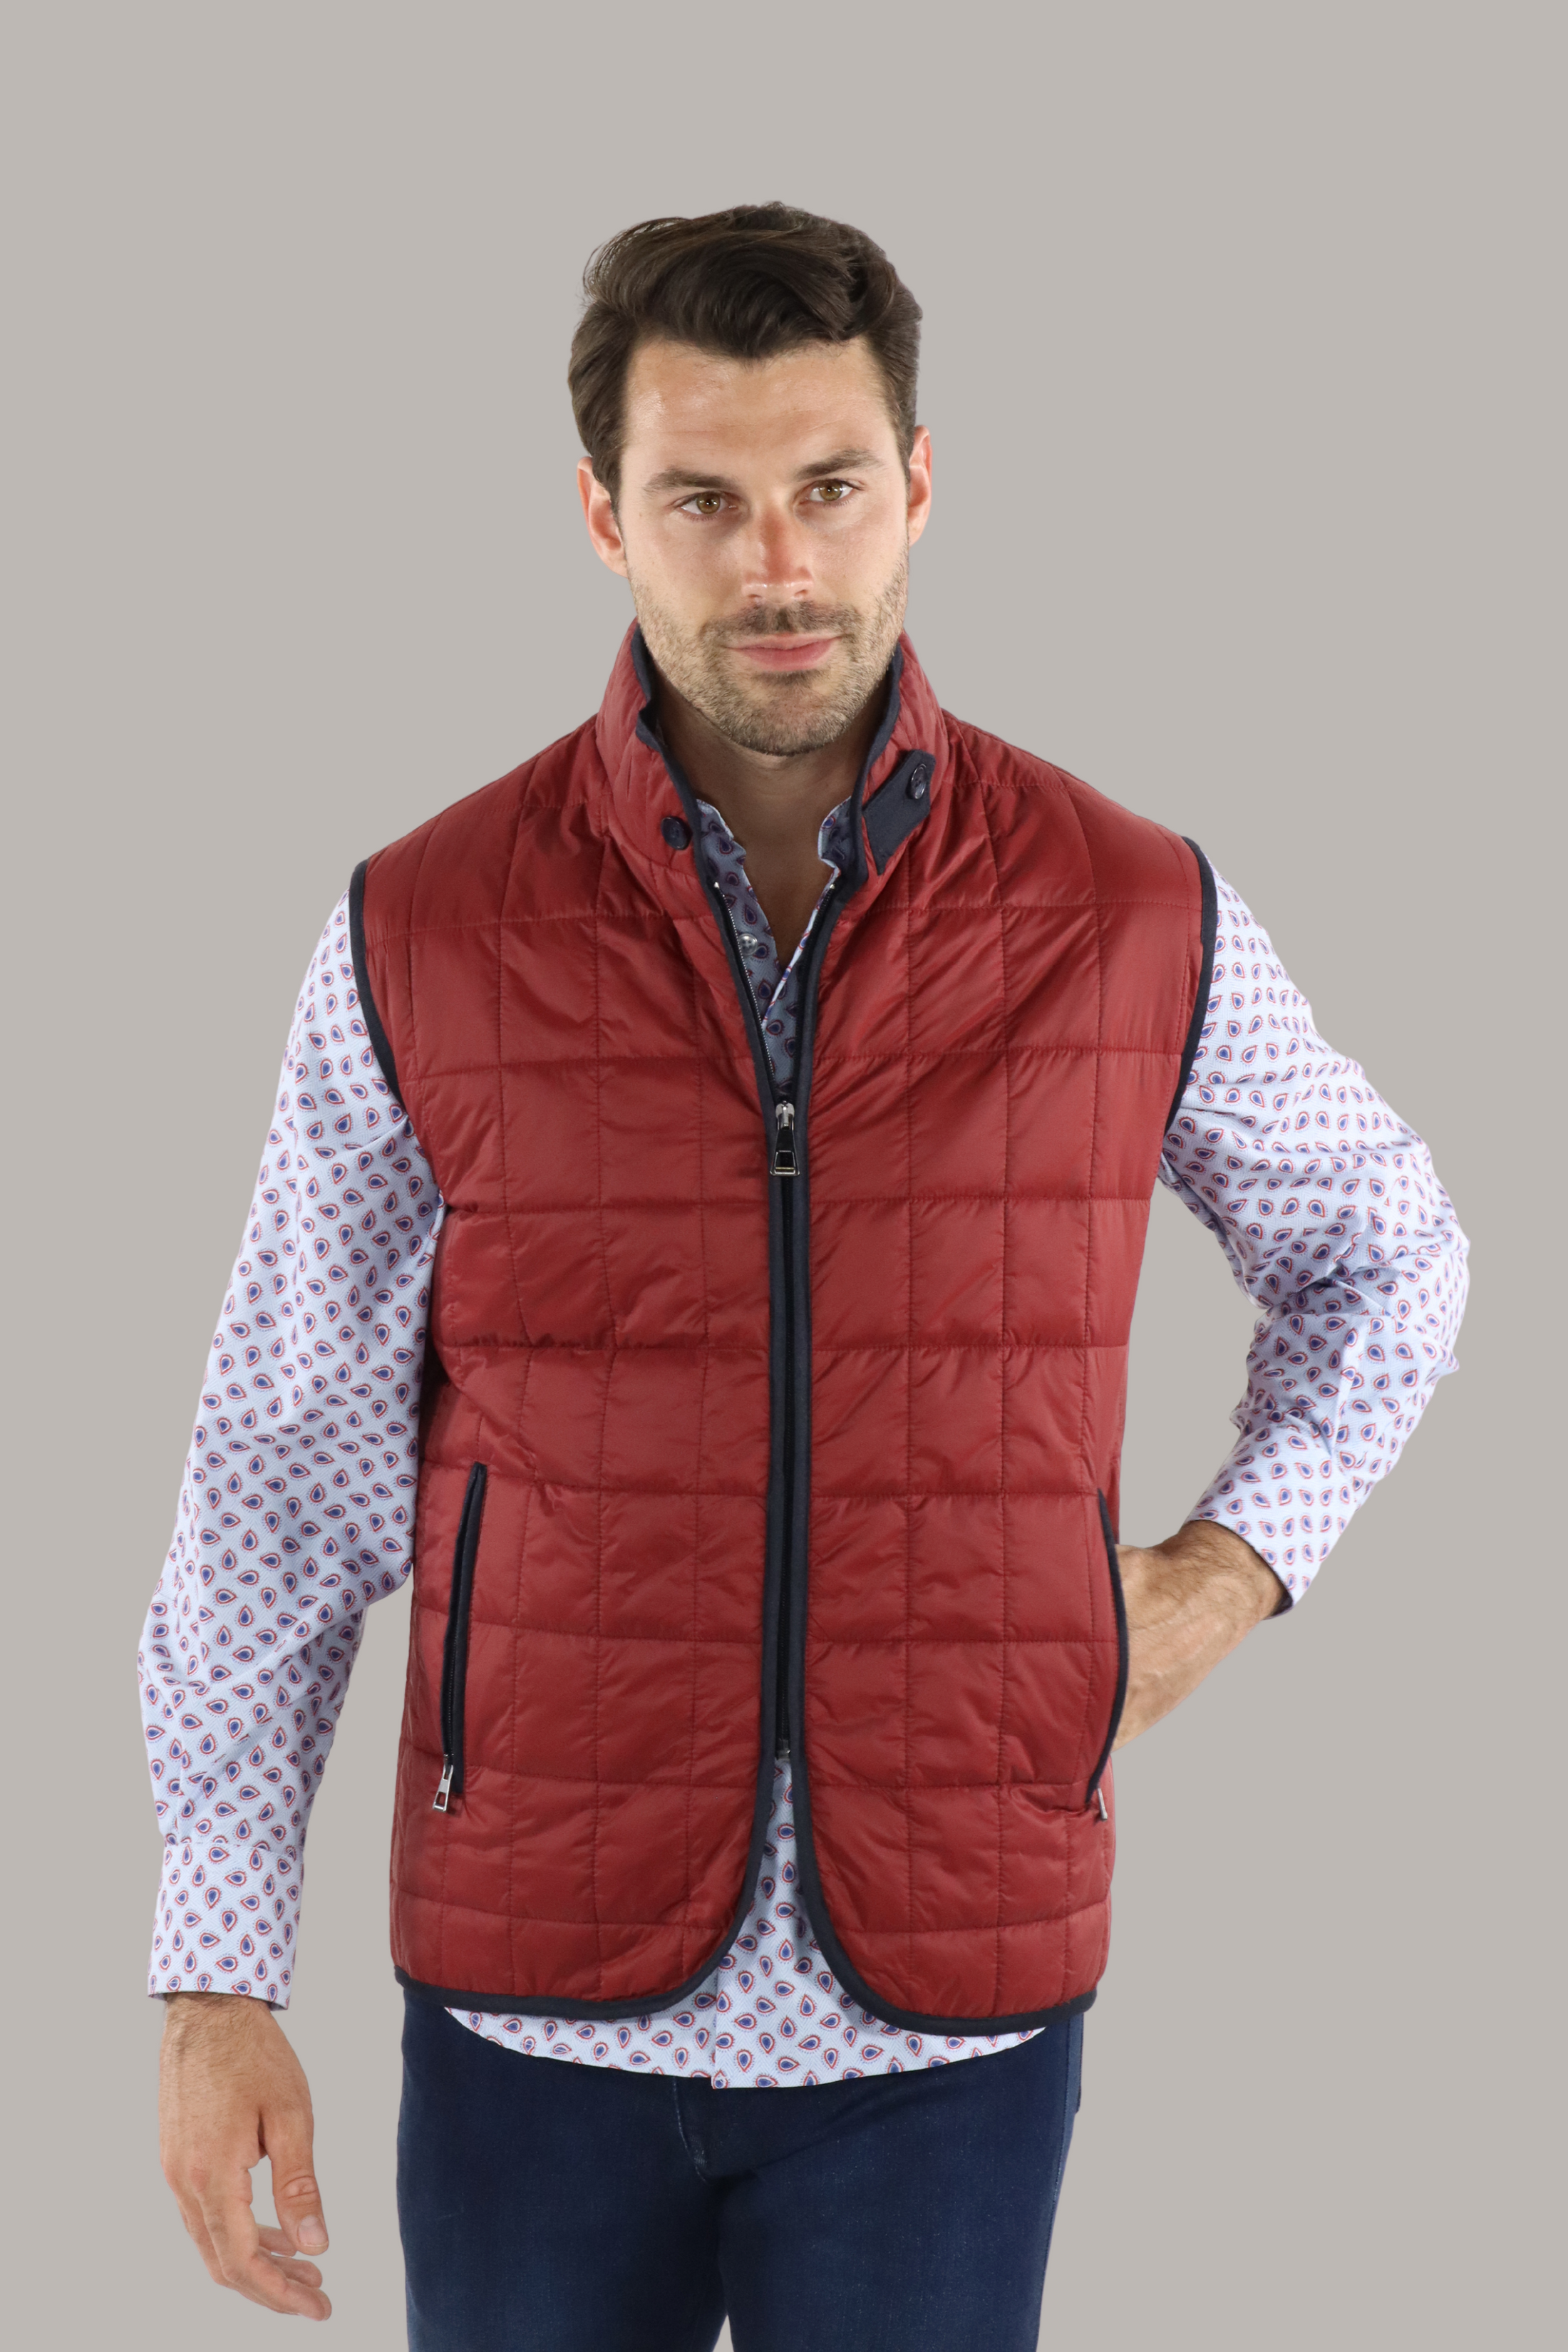 Full Zip Red Quilted Vest